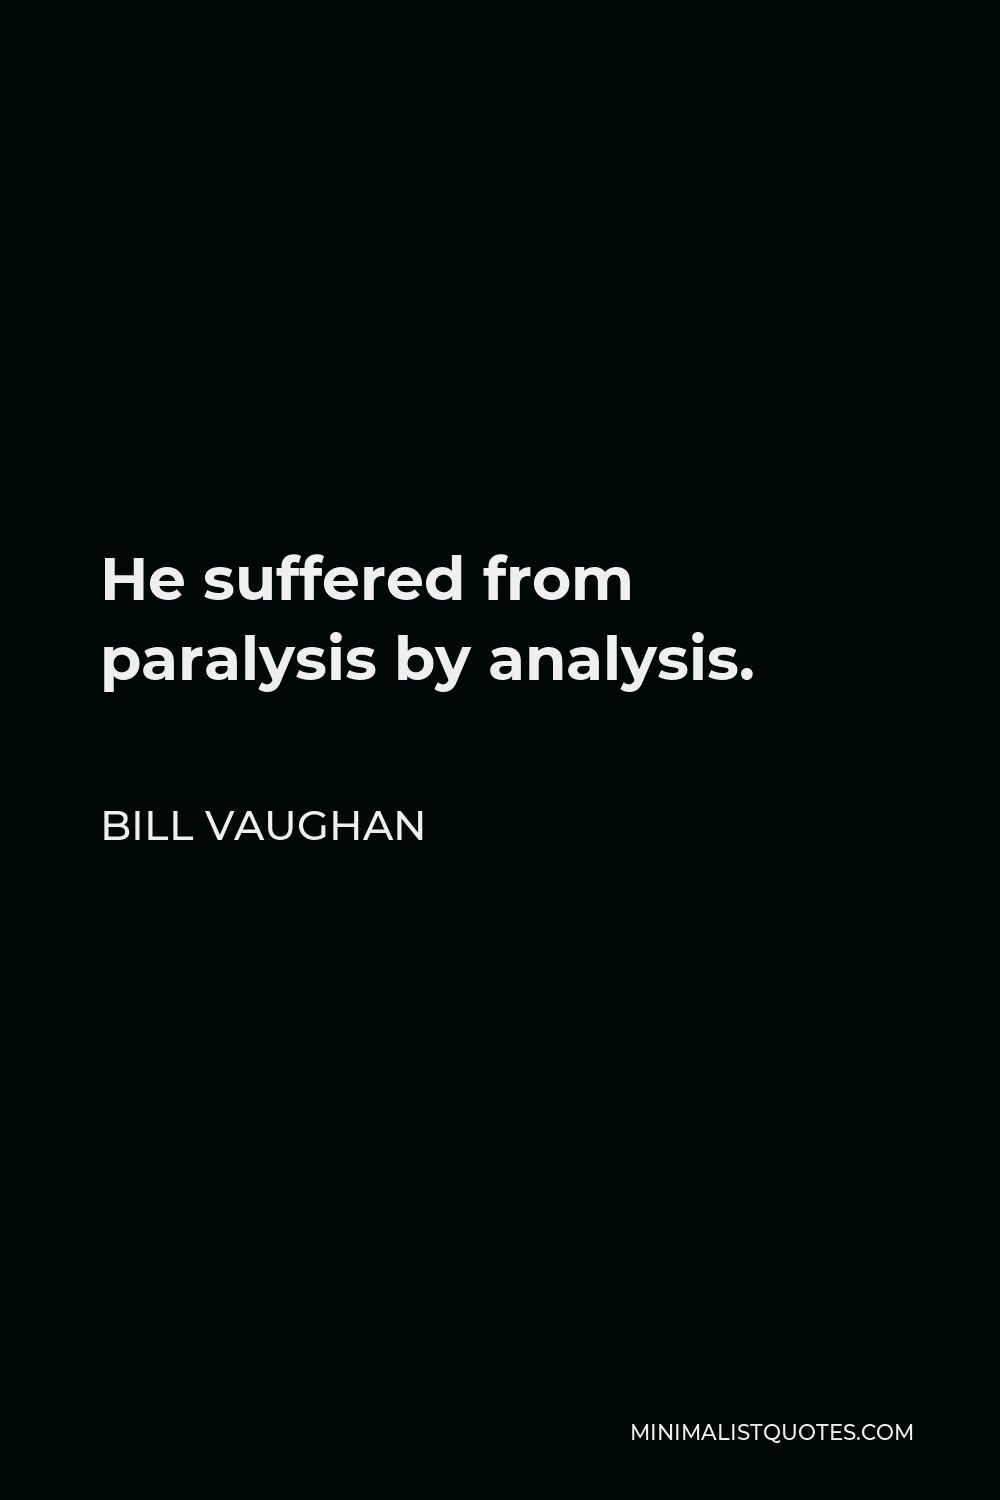 Bill Vaughan Quote - He suffered from paralysis by analysis.